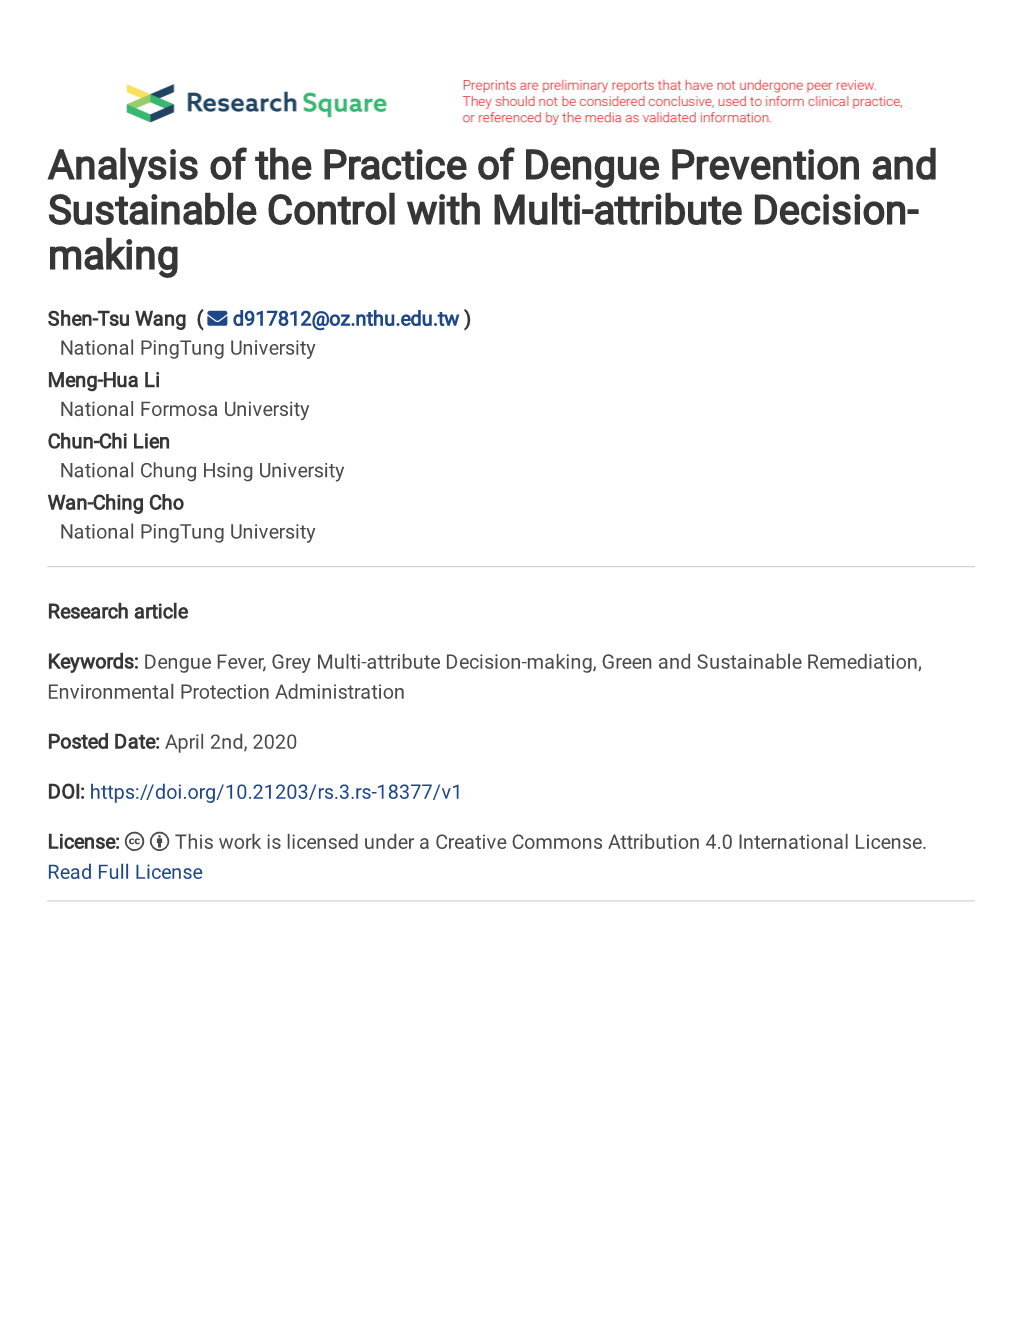 Analysis of the Practice of Dengue Prevention and Sustainable Control with Multi-Attribute Decision- Making